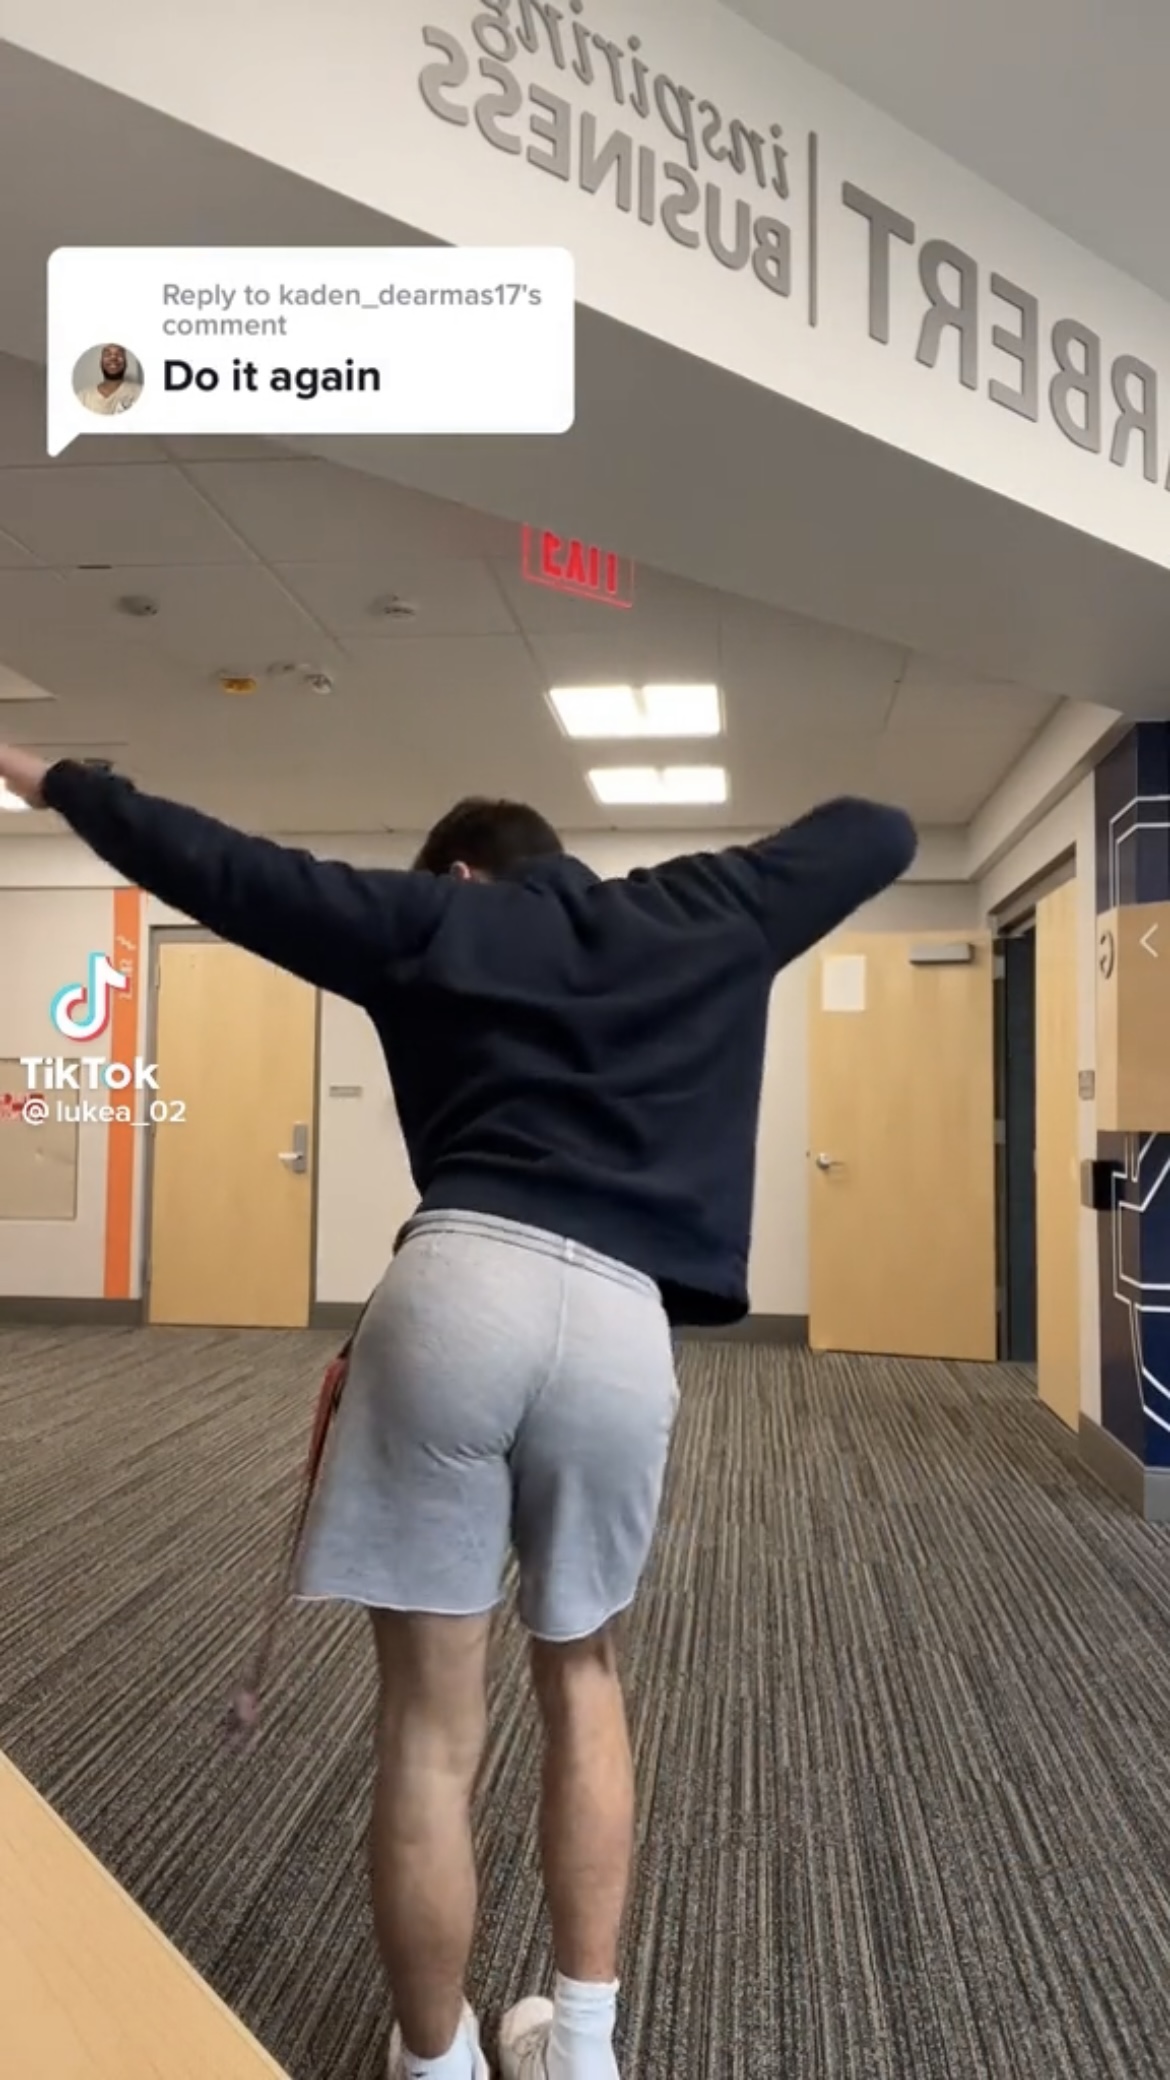 Str8 white bro showing off his ass repeatedly on tiktok